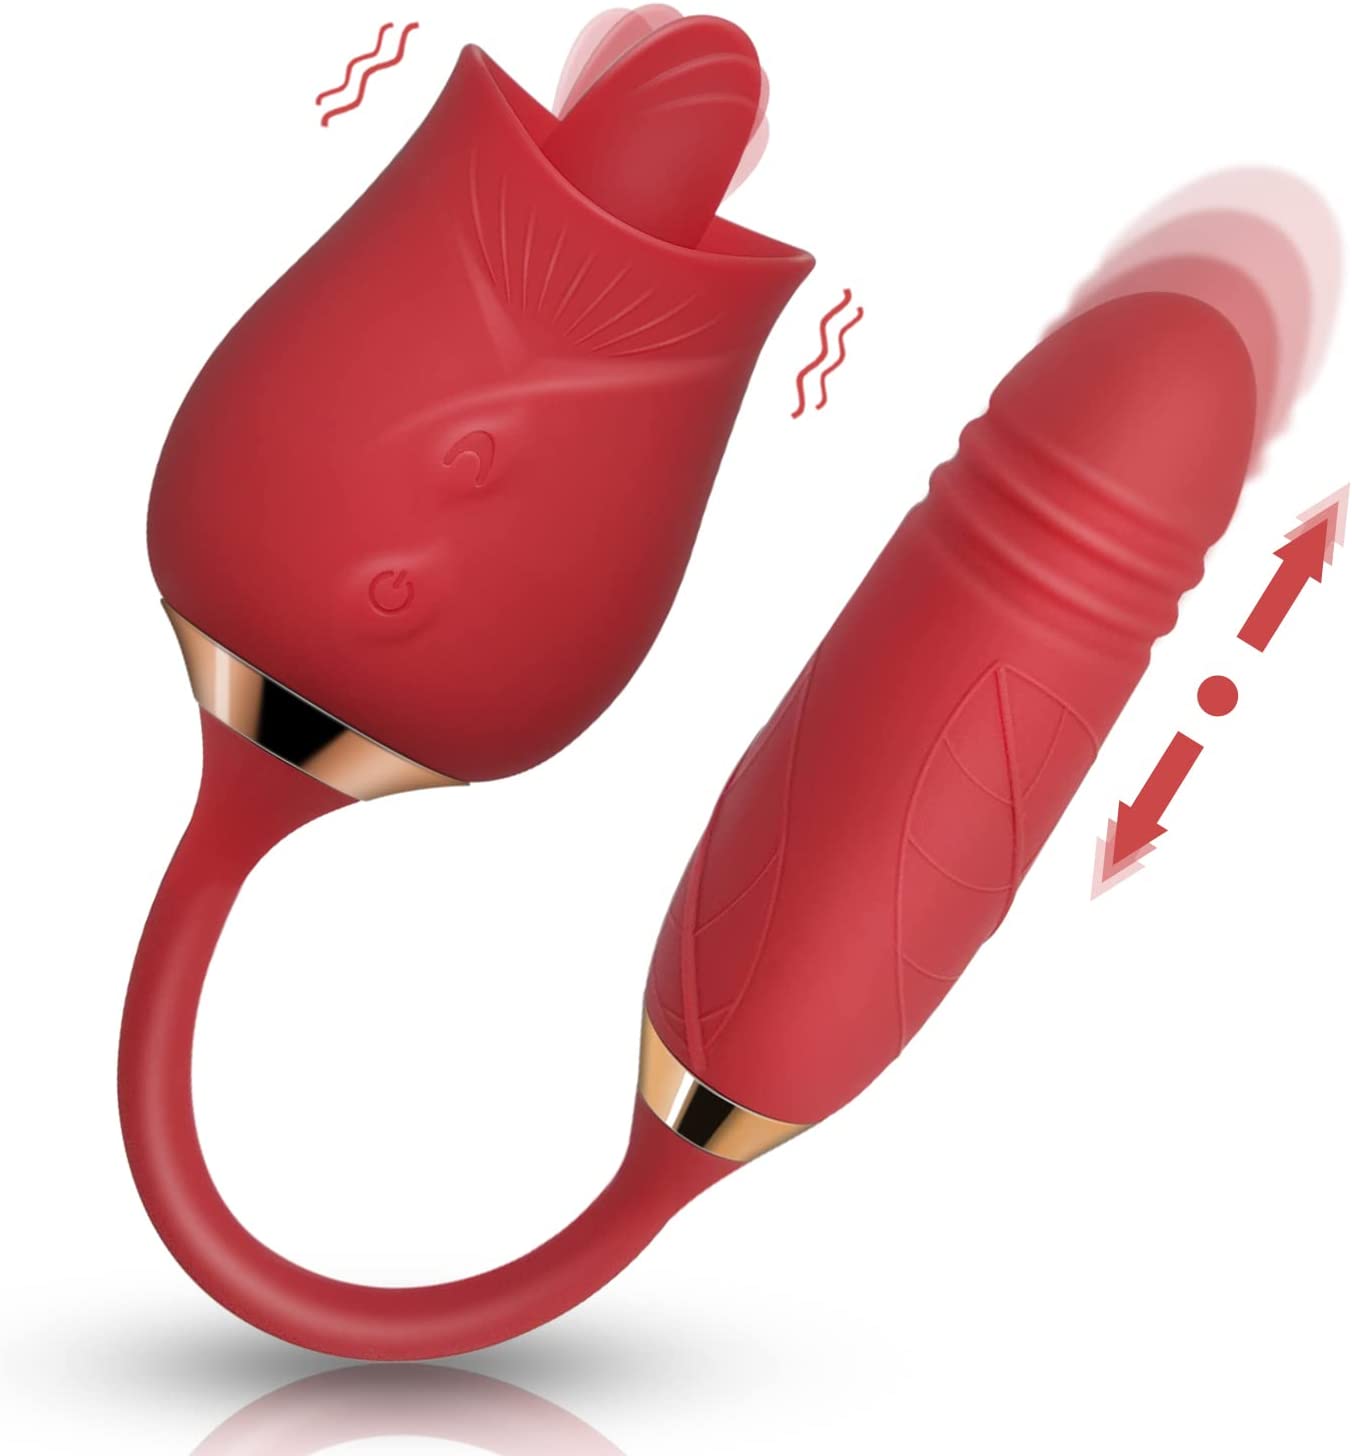 The Licking Rose - 3 in 1 Licking & Thrusting Vibrator